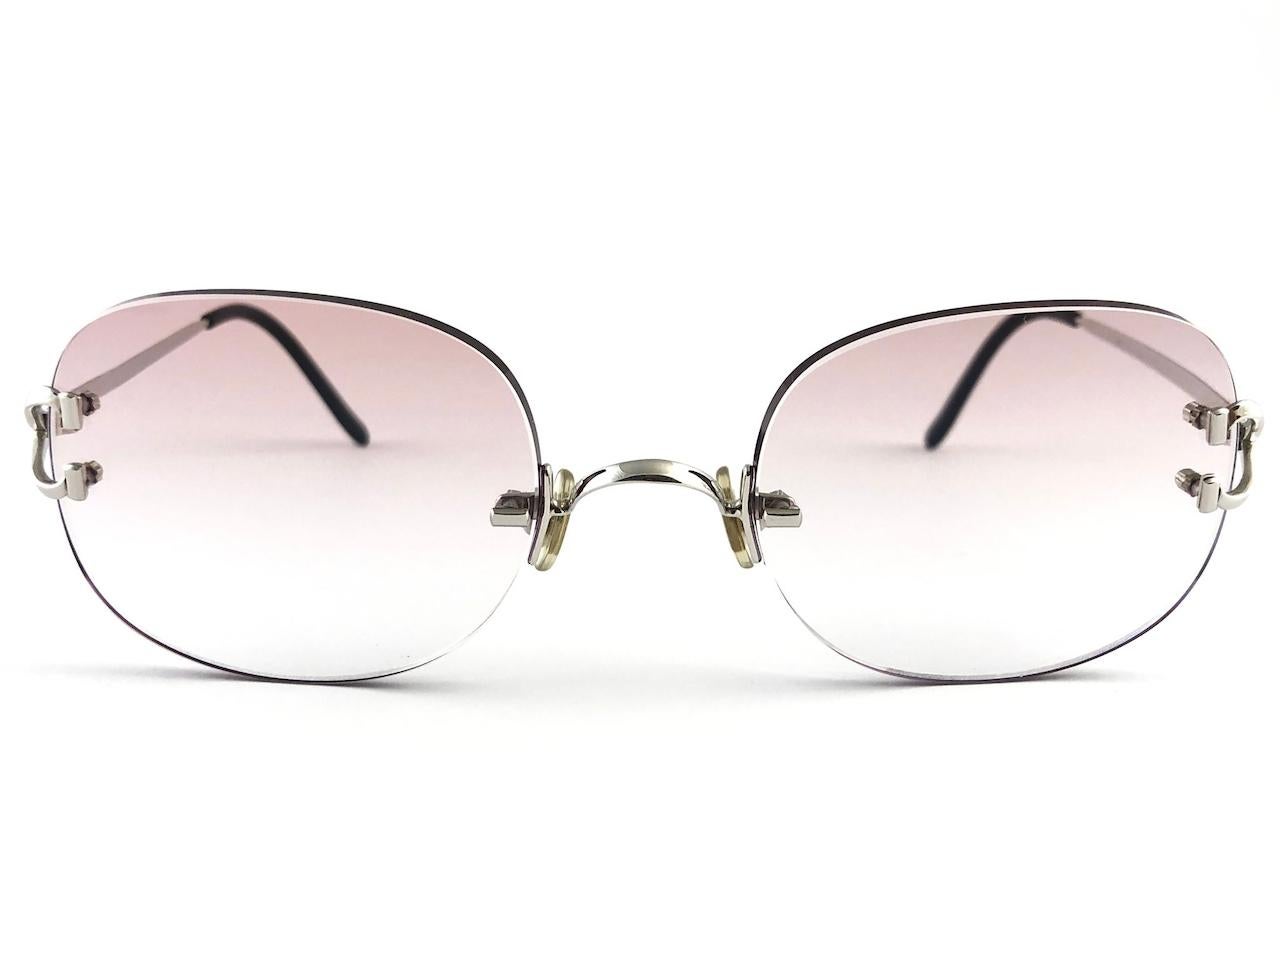 New Cartier Serrano unique rimless platine edition sunglasses with ultra light brown gradient (uv protection) lenses.  Frame with the front and sides in special edition gold. All hallmarks. Cartier gold signs on the ear paddles.  These are like a